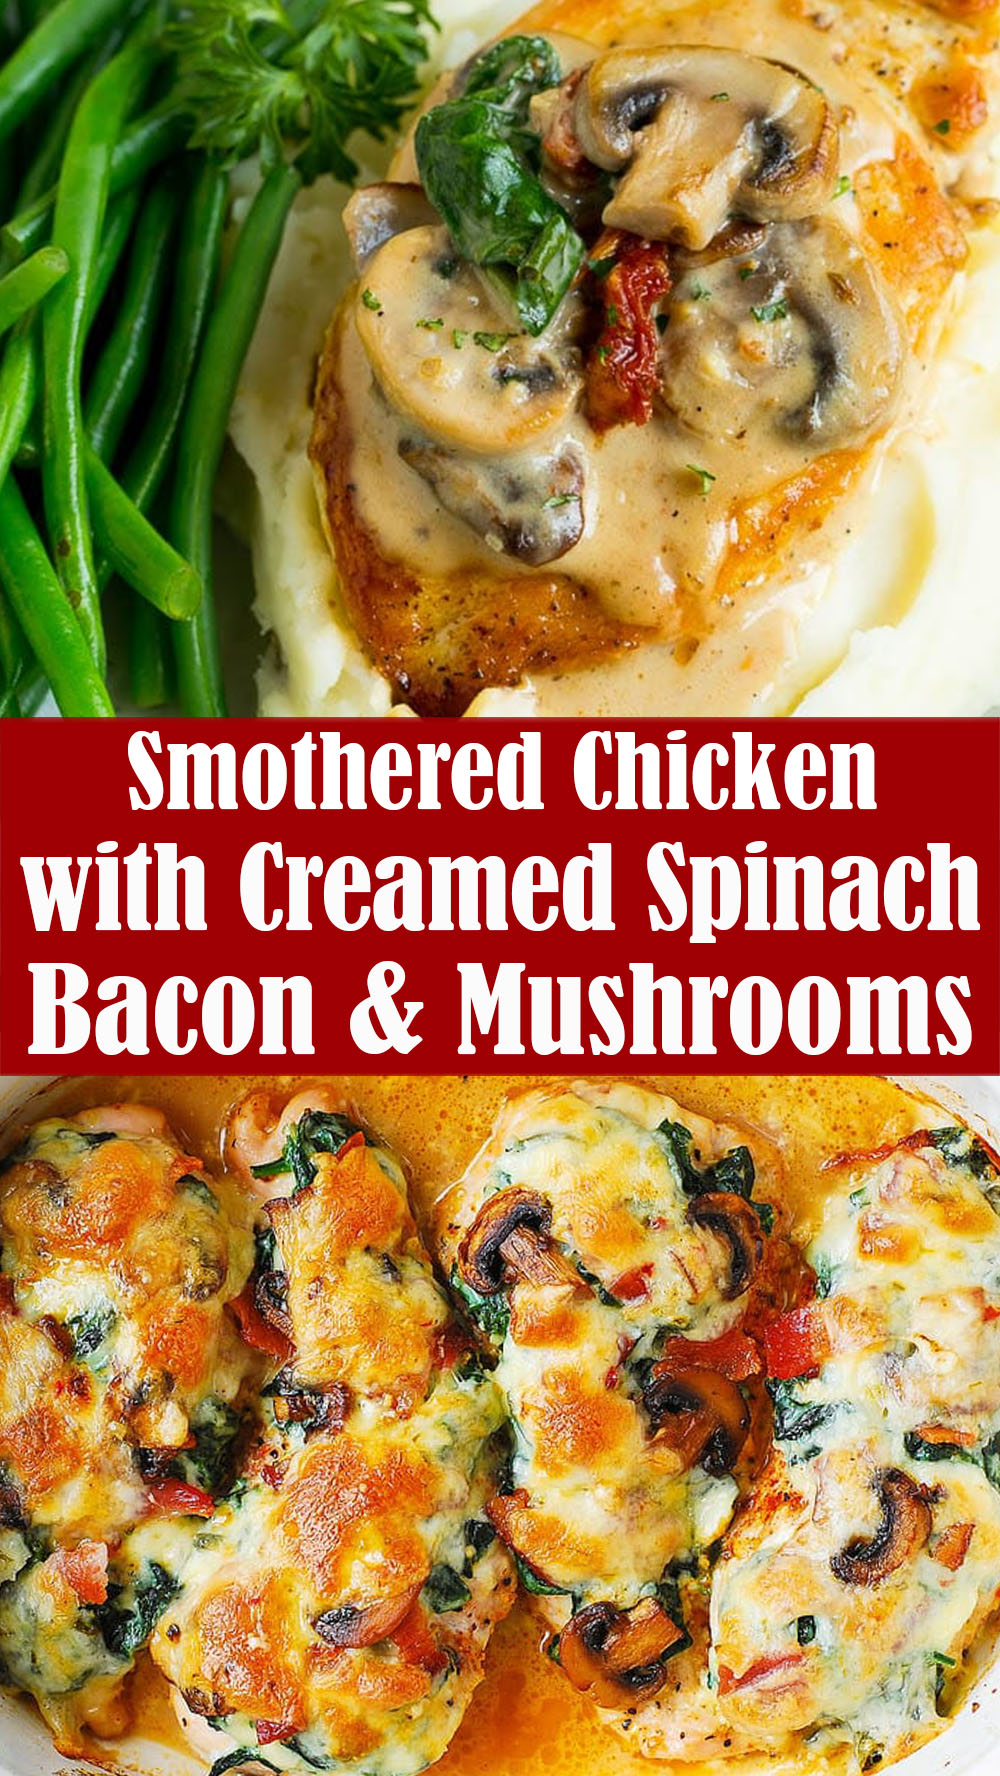 Smothered Chicken with Creamed Spinach, Bacon & Mushrooms